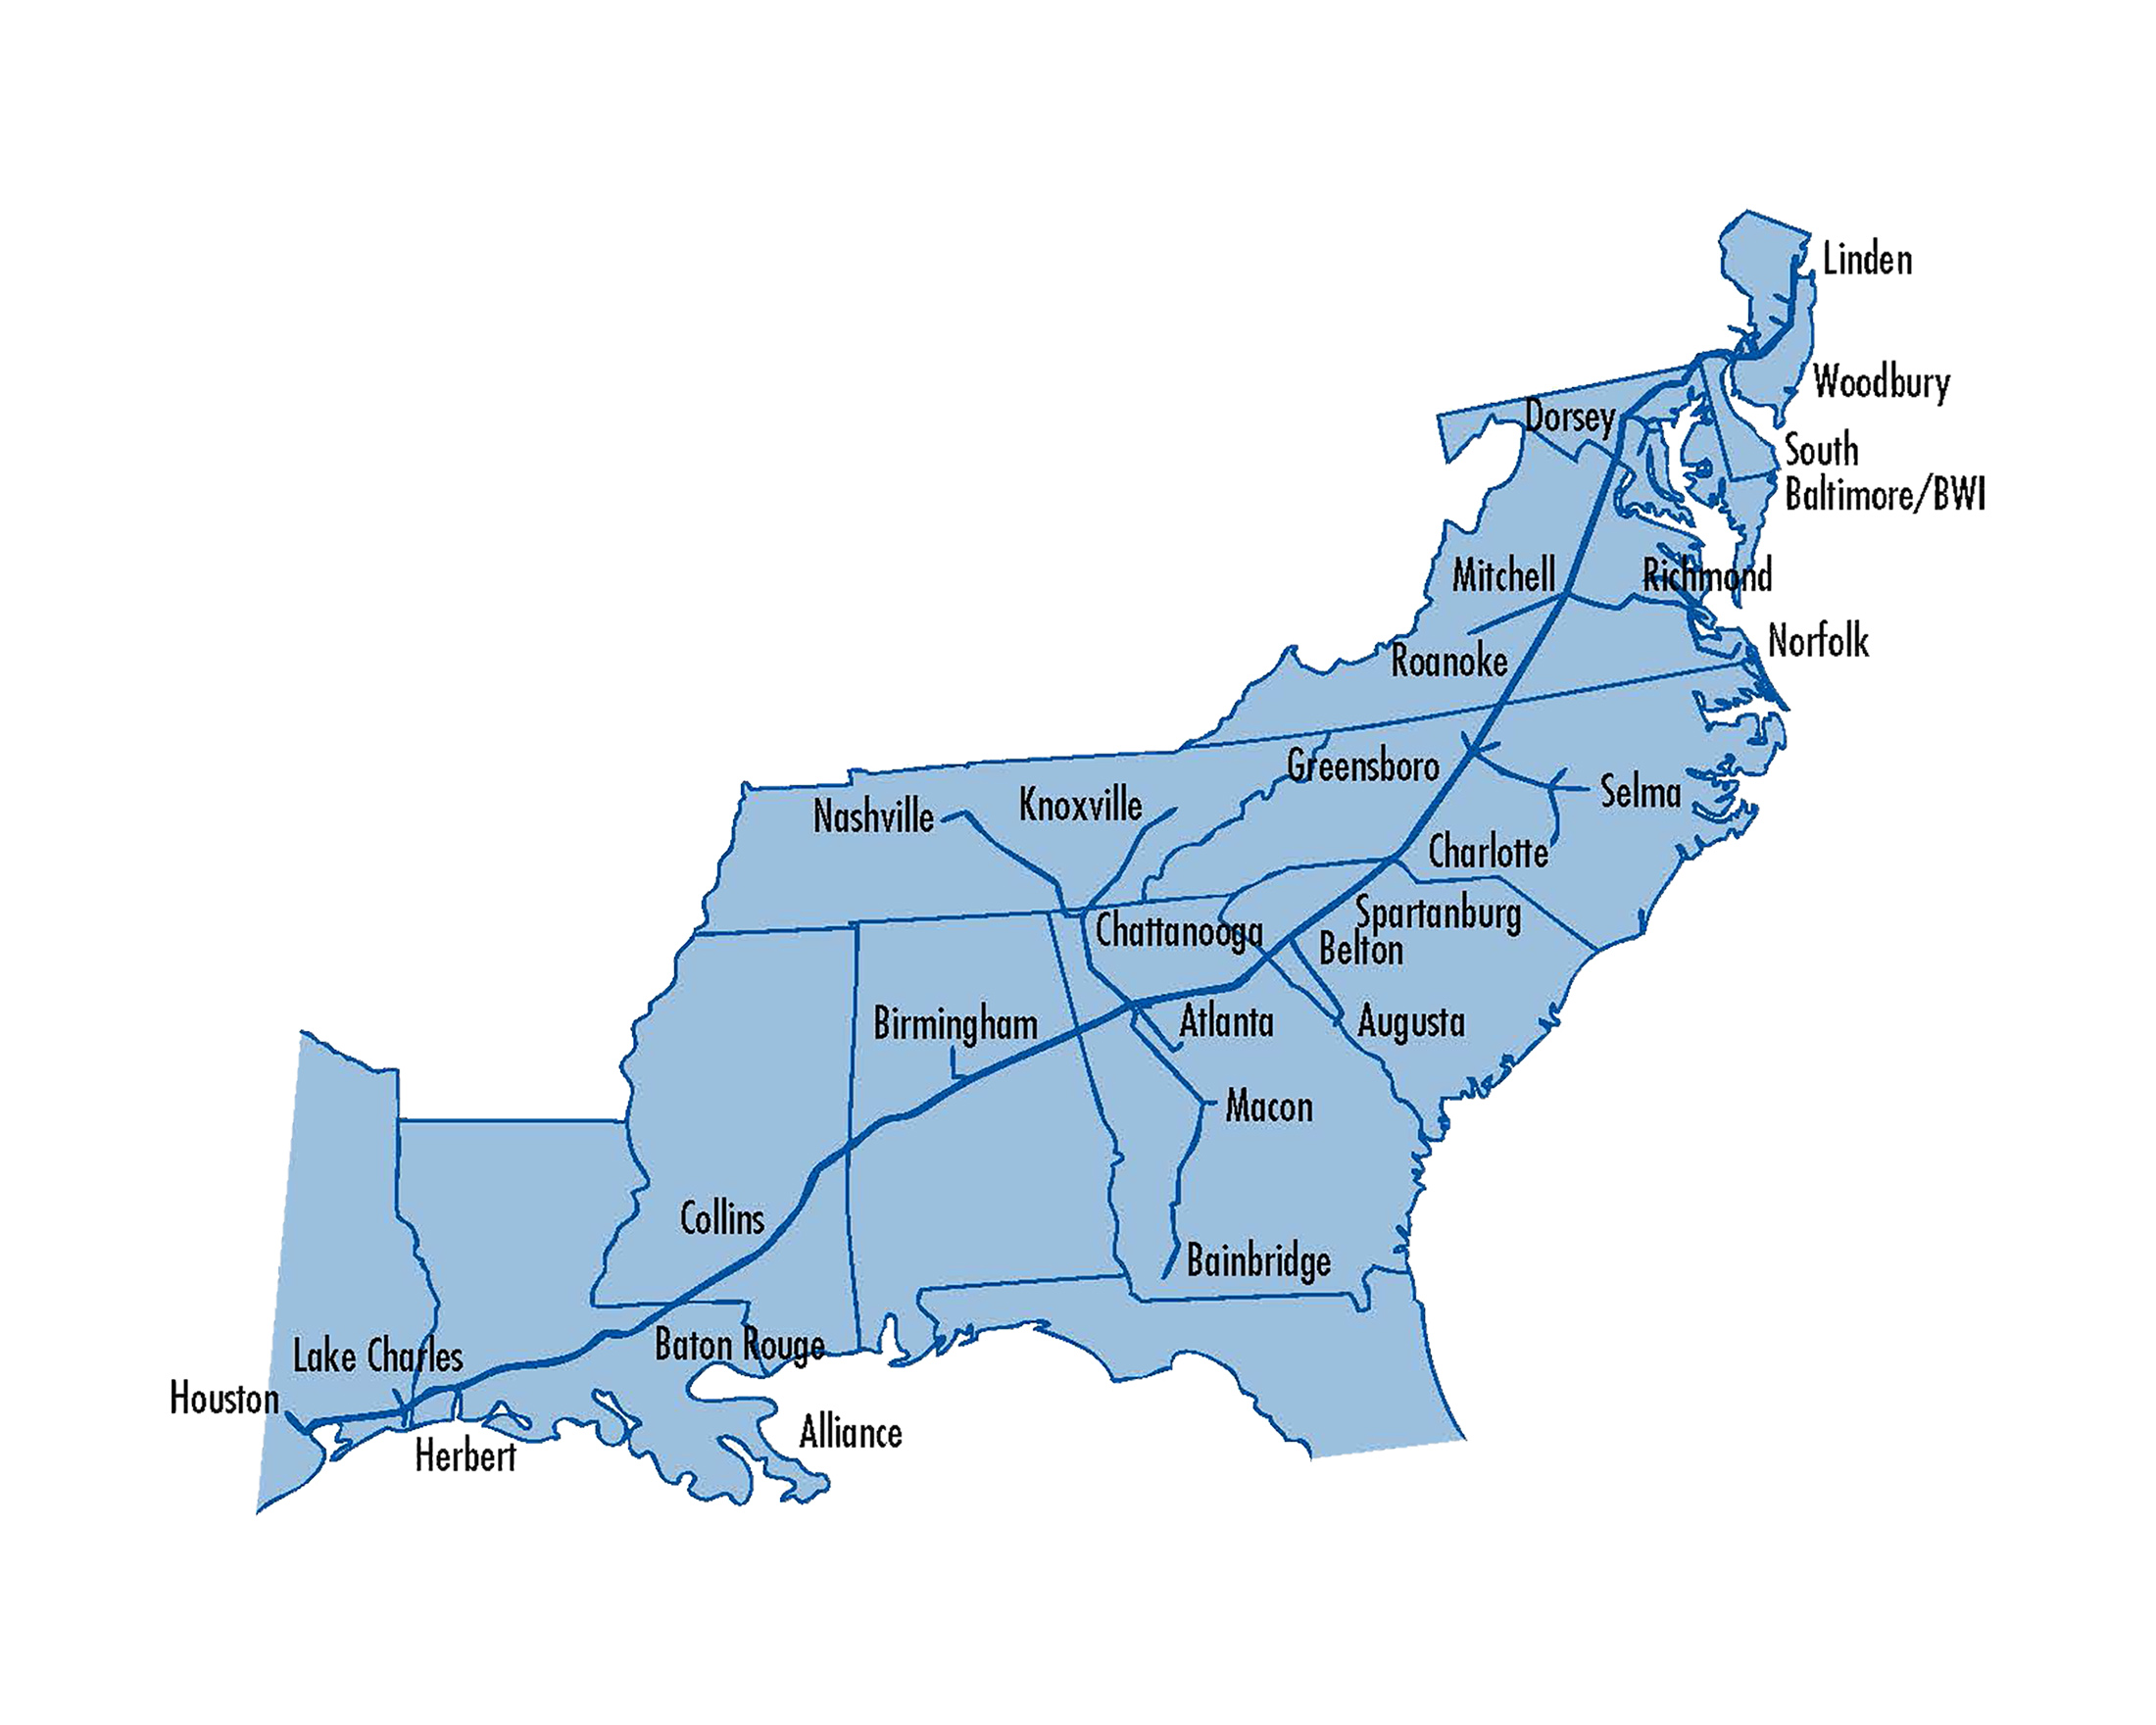 relates to Colonial Pipeline Says Network Issues Affecting Shippers